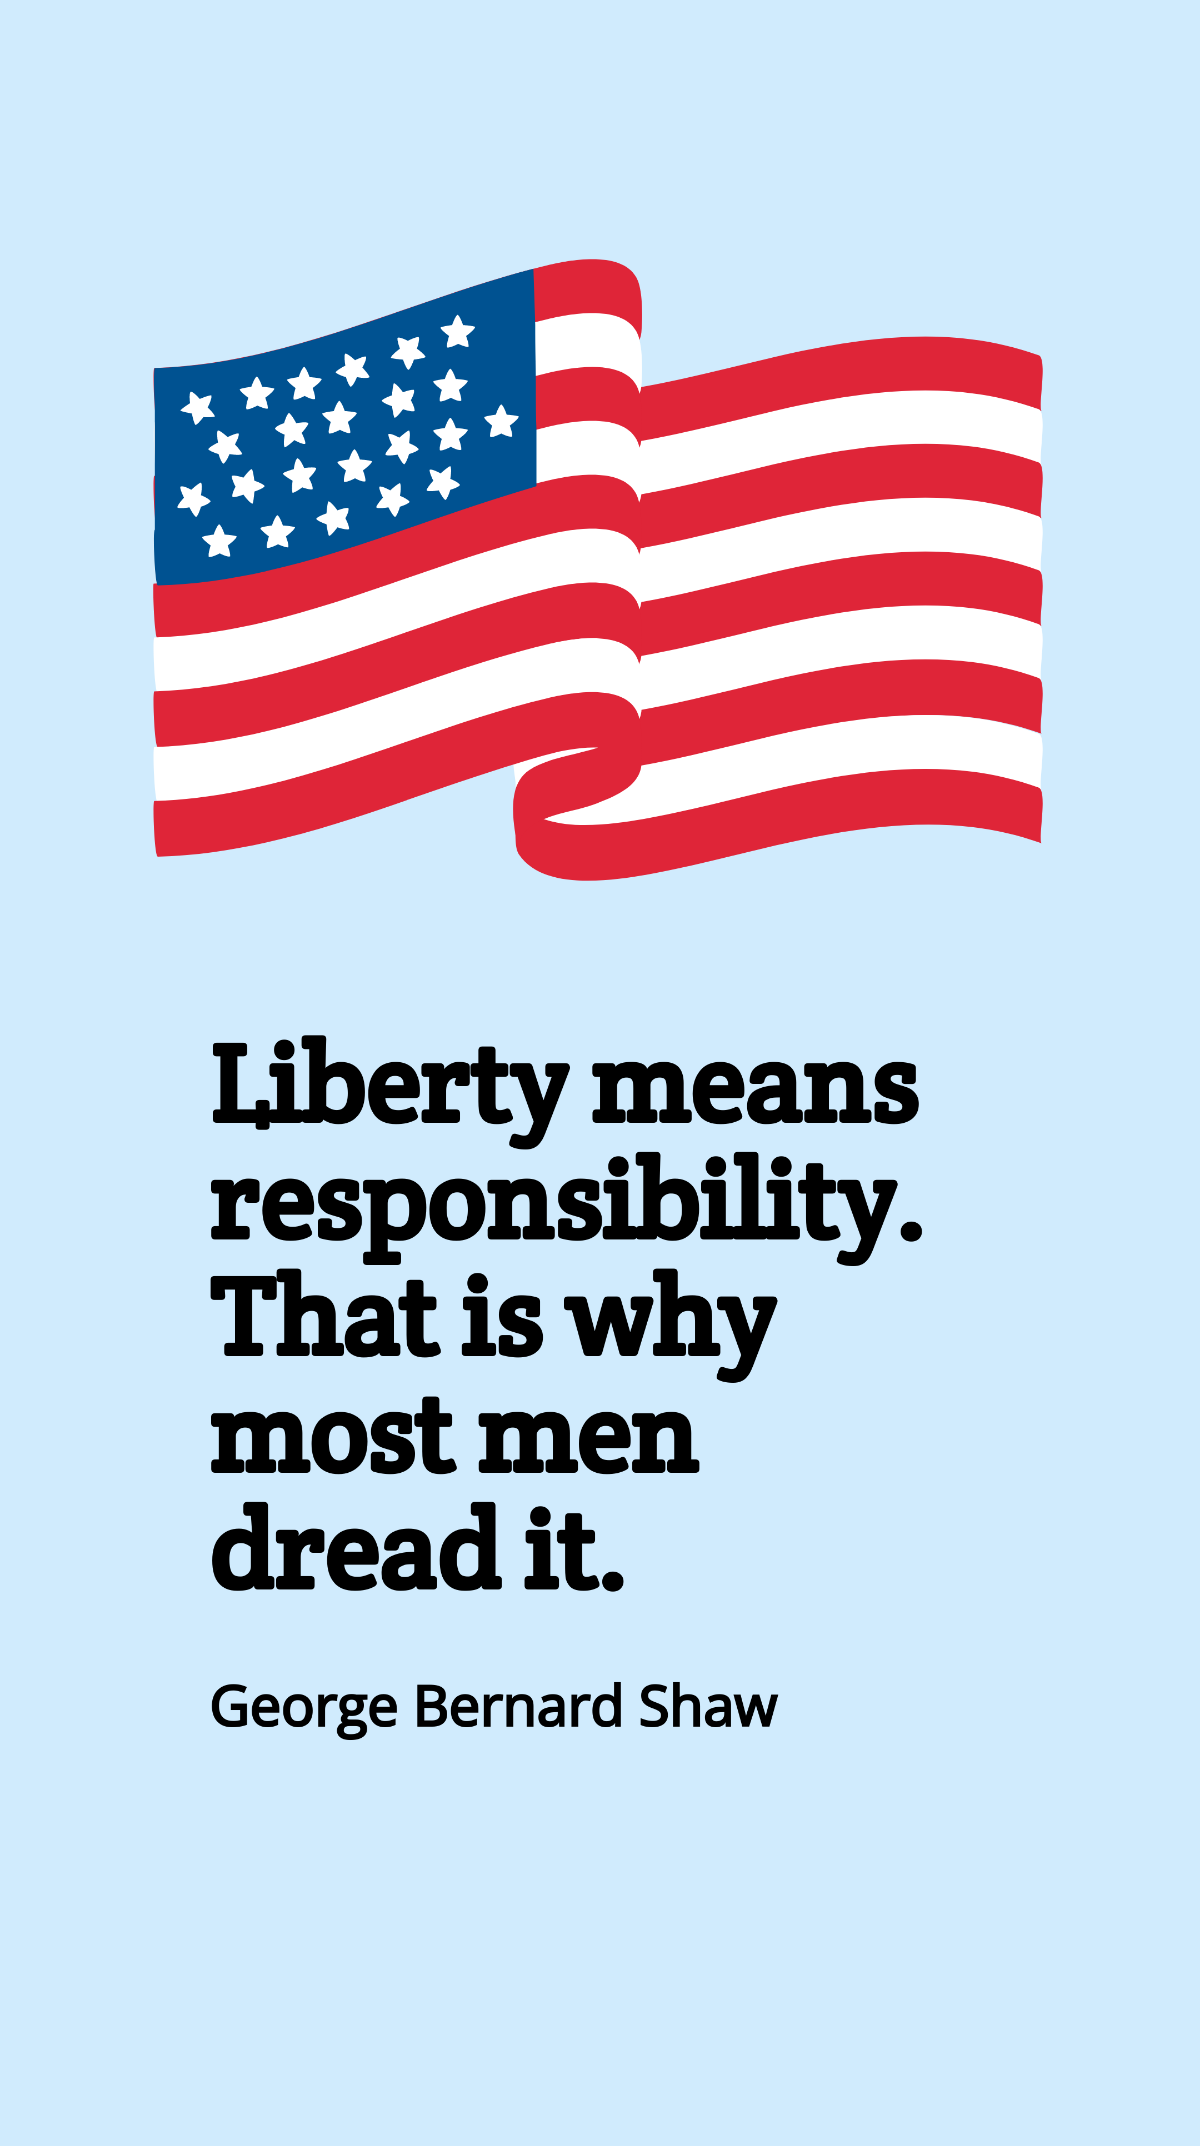 George Bernard Shaw - Liberty means responsibility. That is why most men dread it.